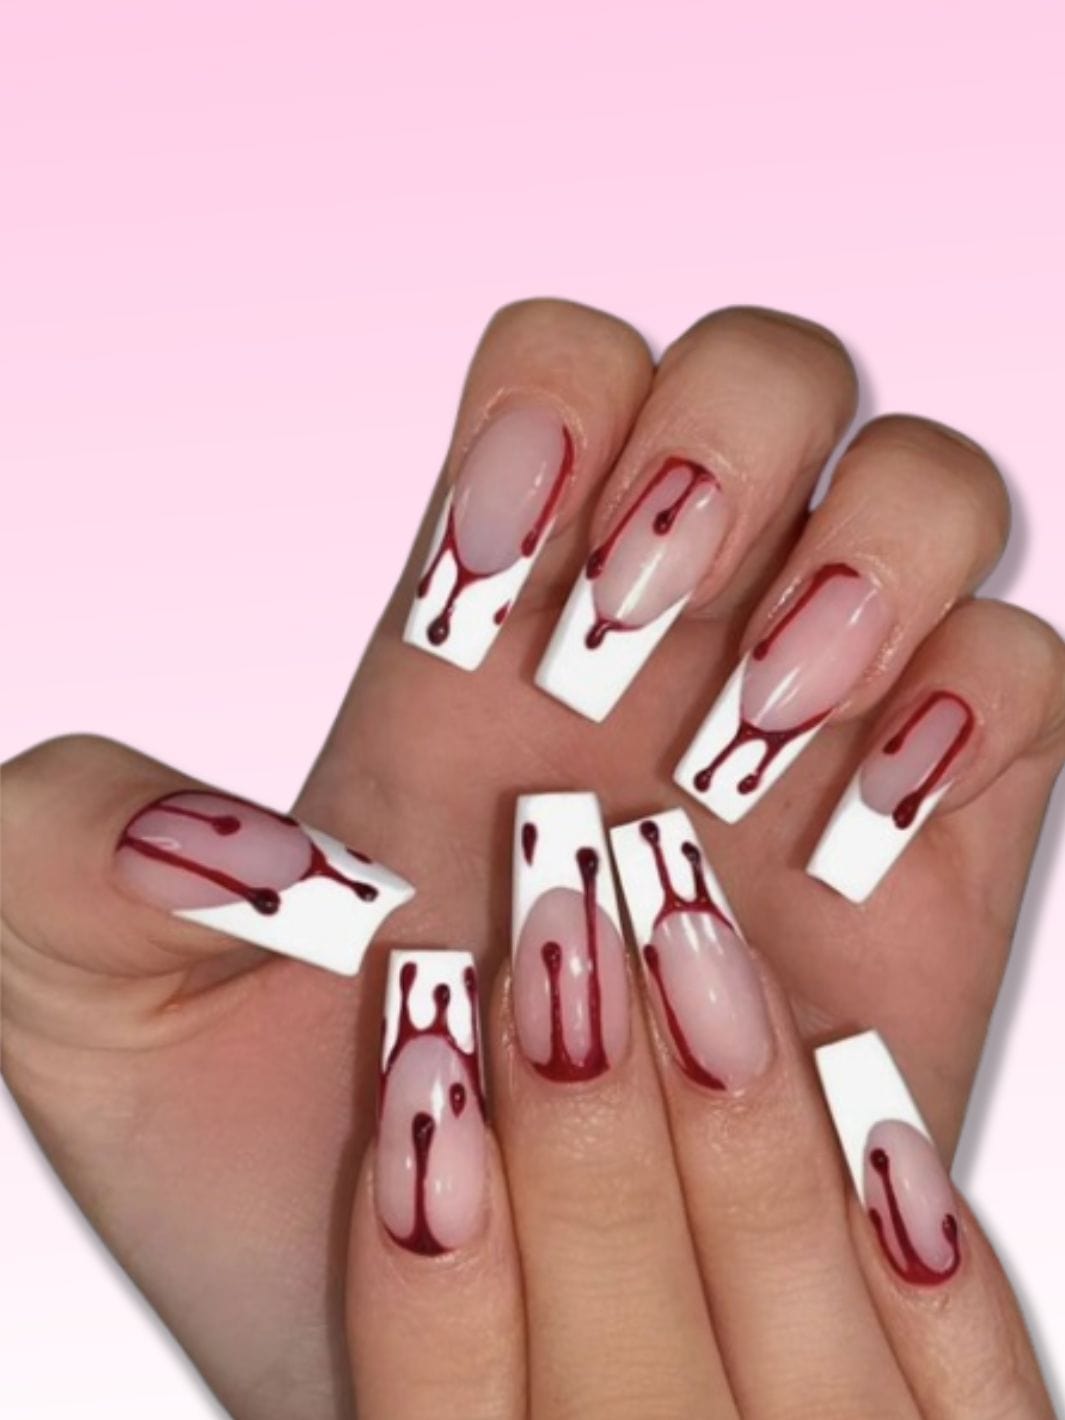 Faux ongles halloween avec colle Nail Chic